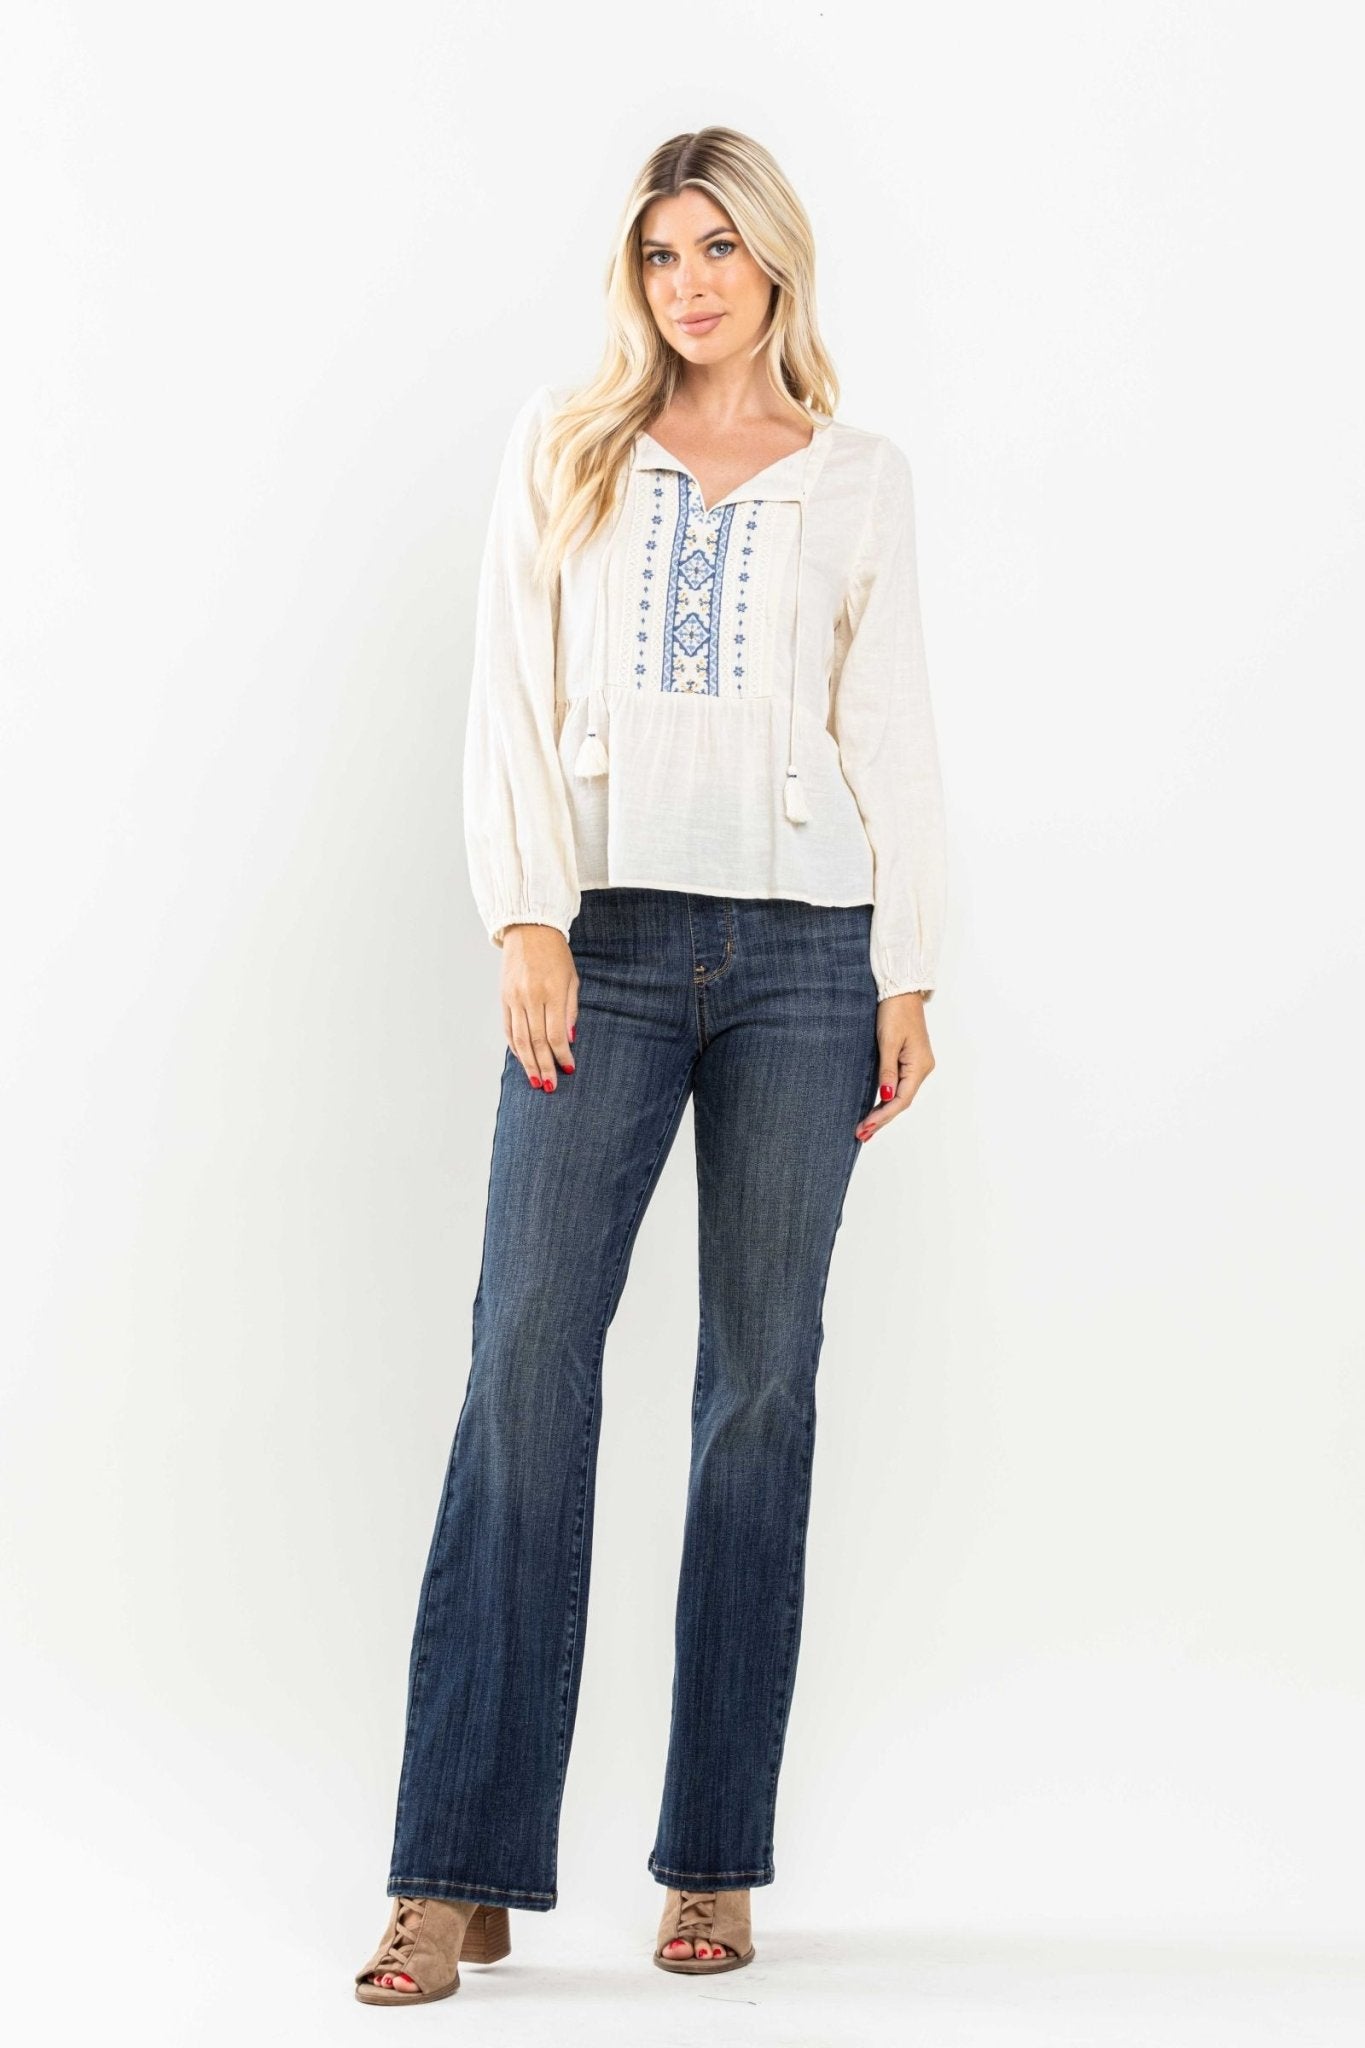 Audrey Pull On Slim Bootcut Jeans - Lavender Hills BeautyJudy Blue